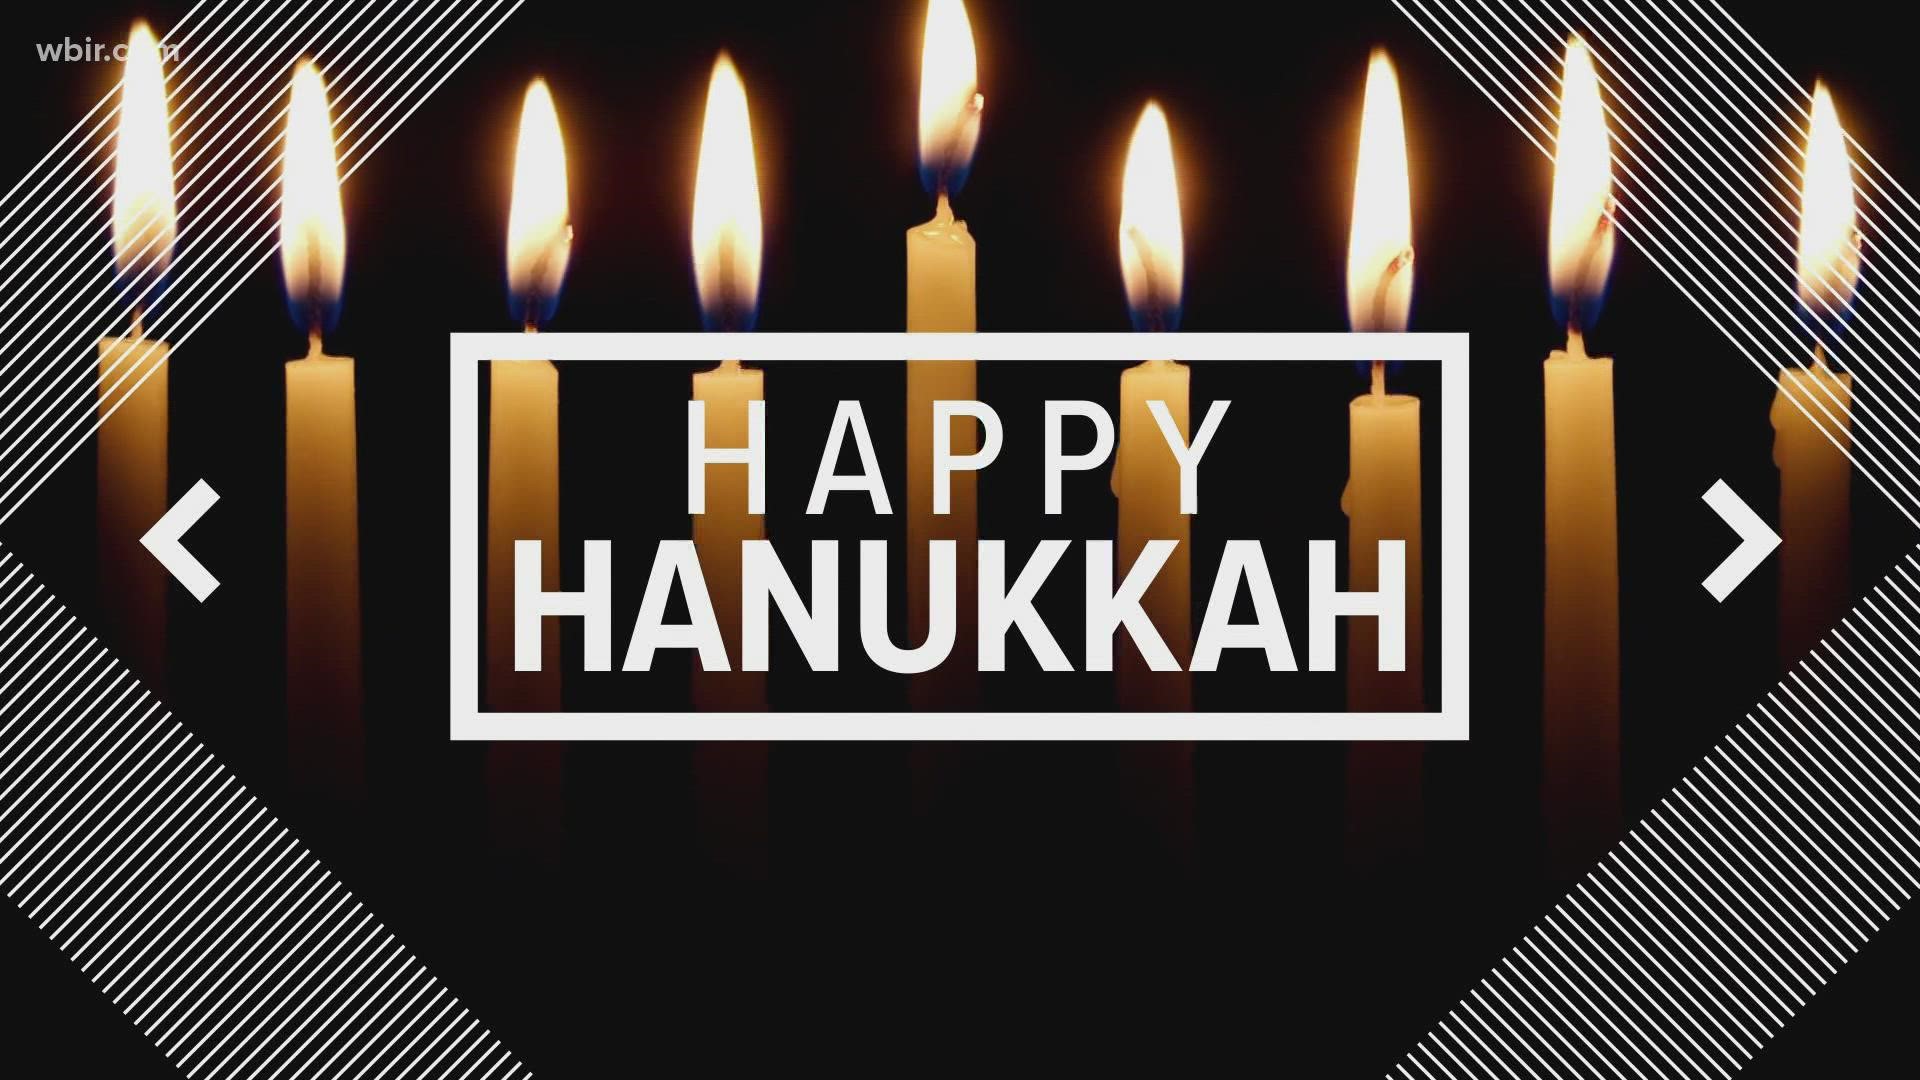 Hanukkah comes earlier than usual this year, starting at the end of November instead of in December.